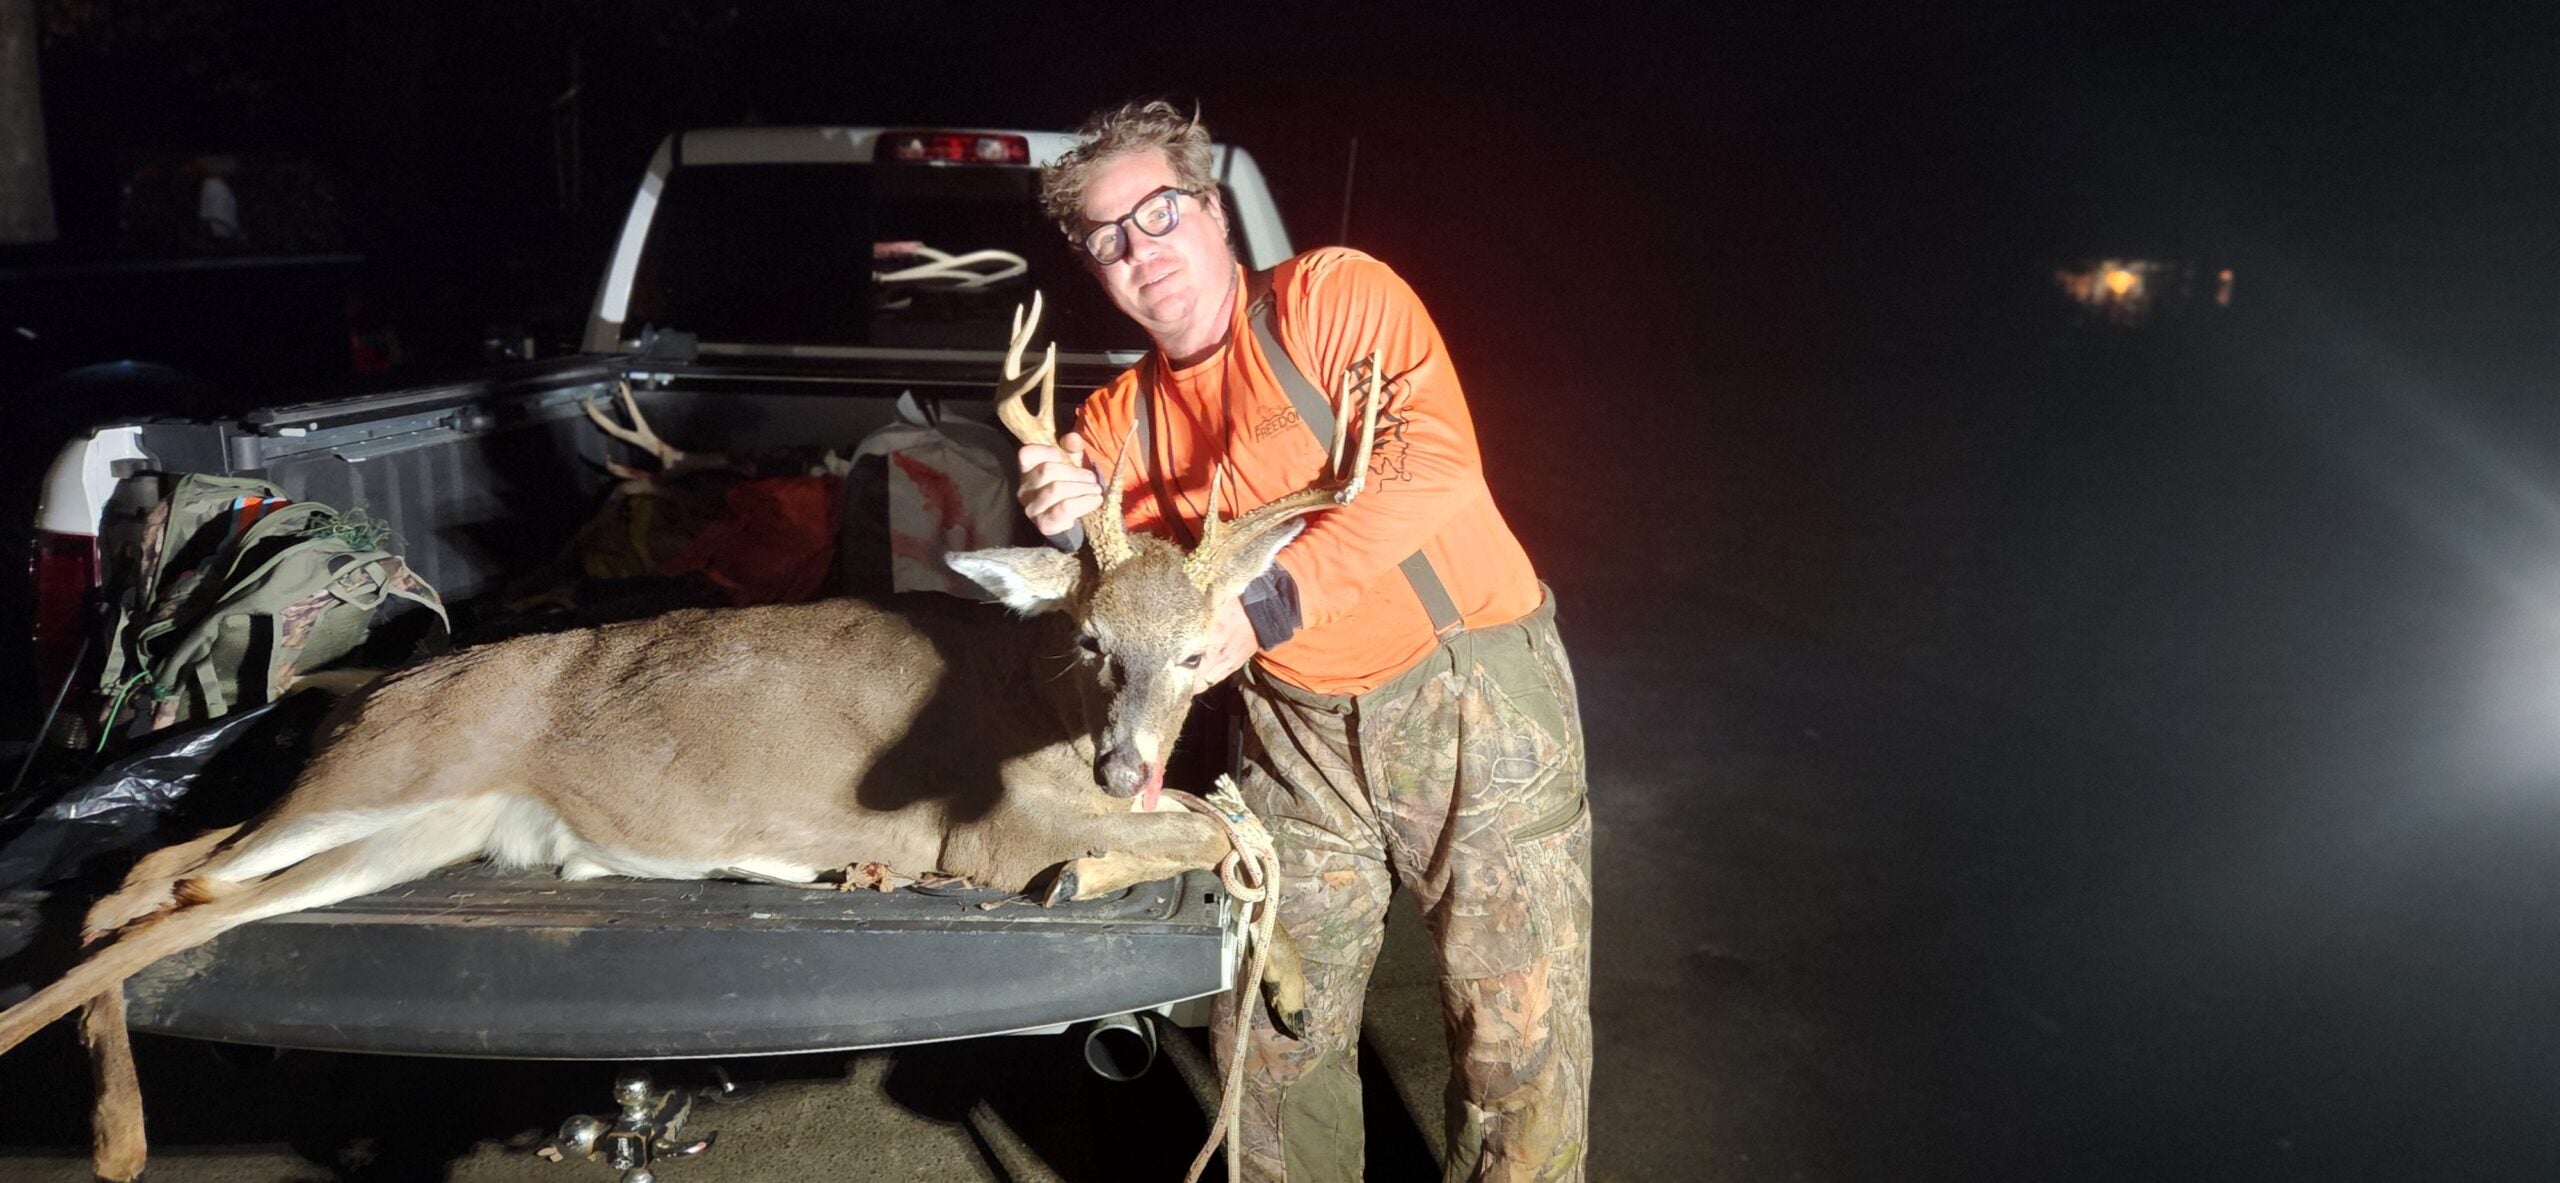 the hunter holds the deer's head with antlers behind the pickup truck